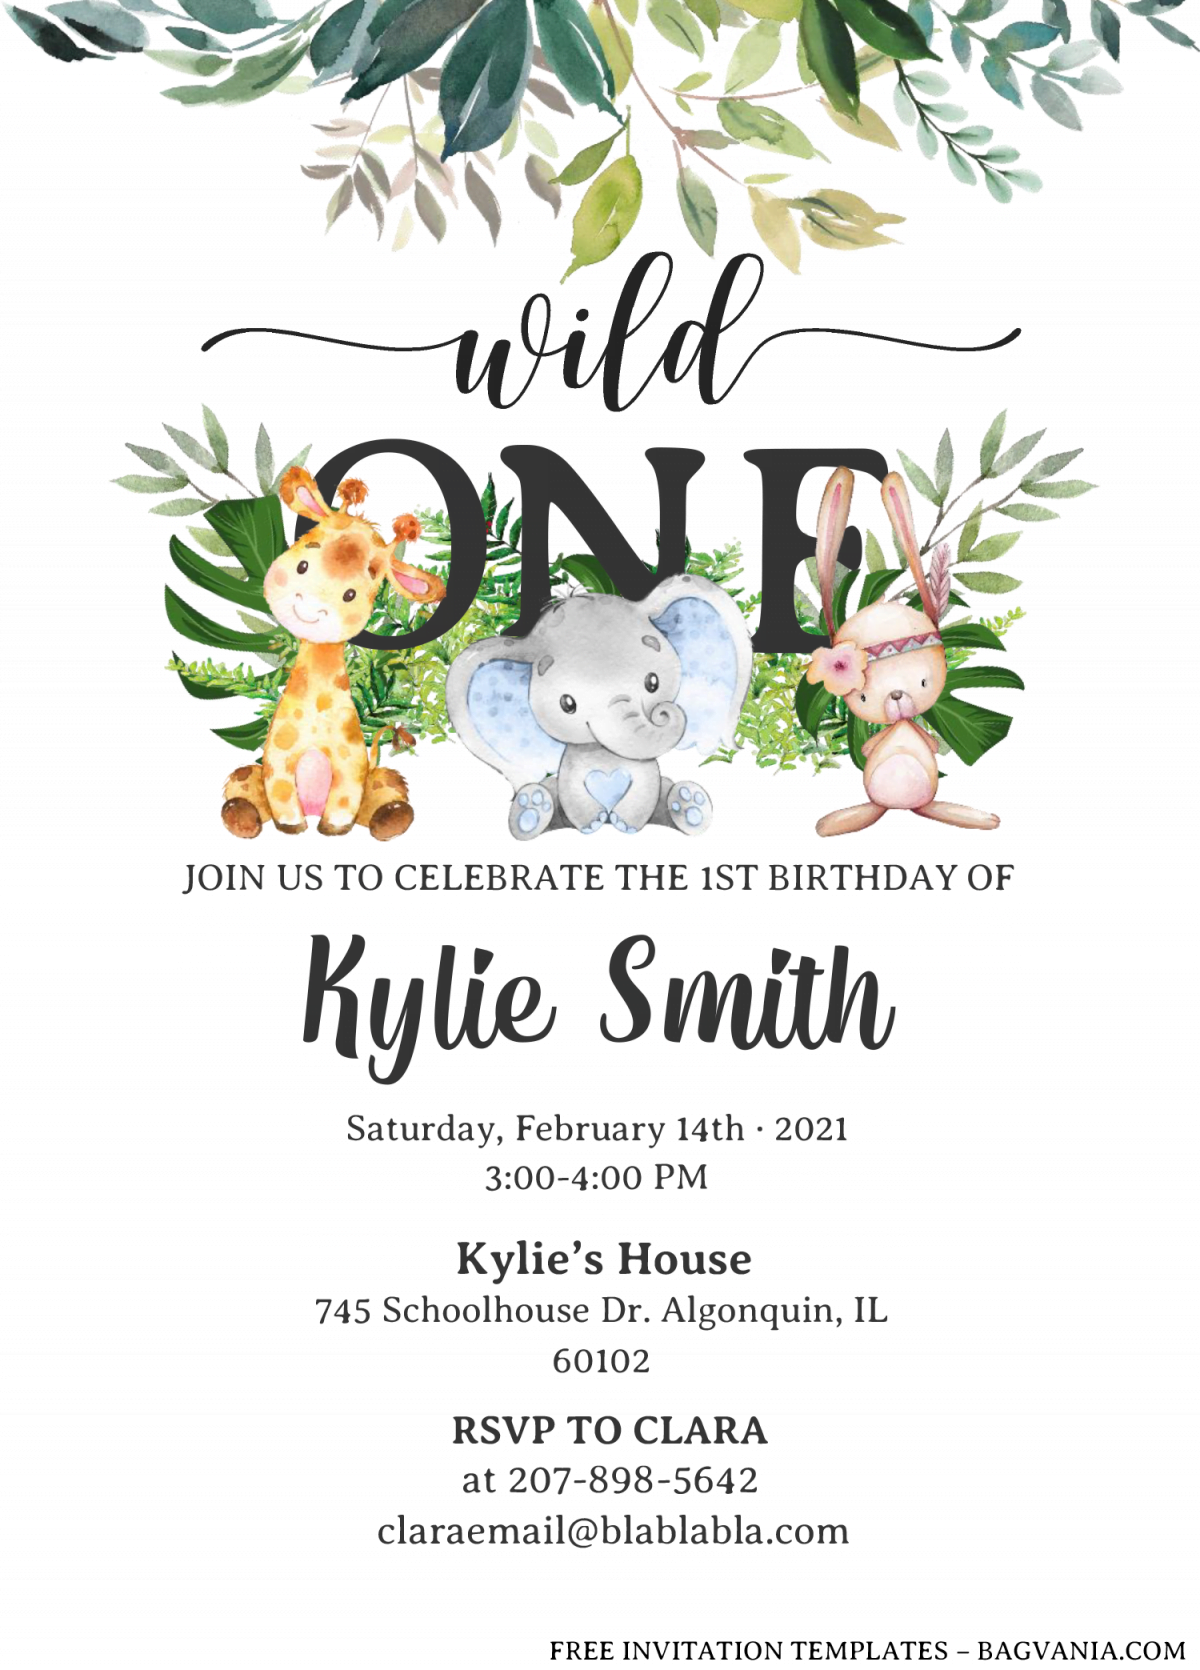 Wild One Invitation Templates - Editable With MS Word and has cute safari animals